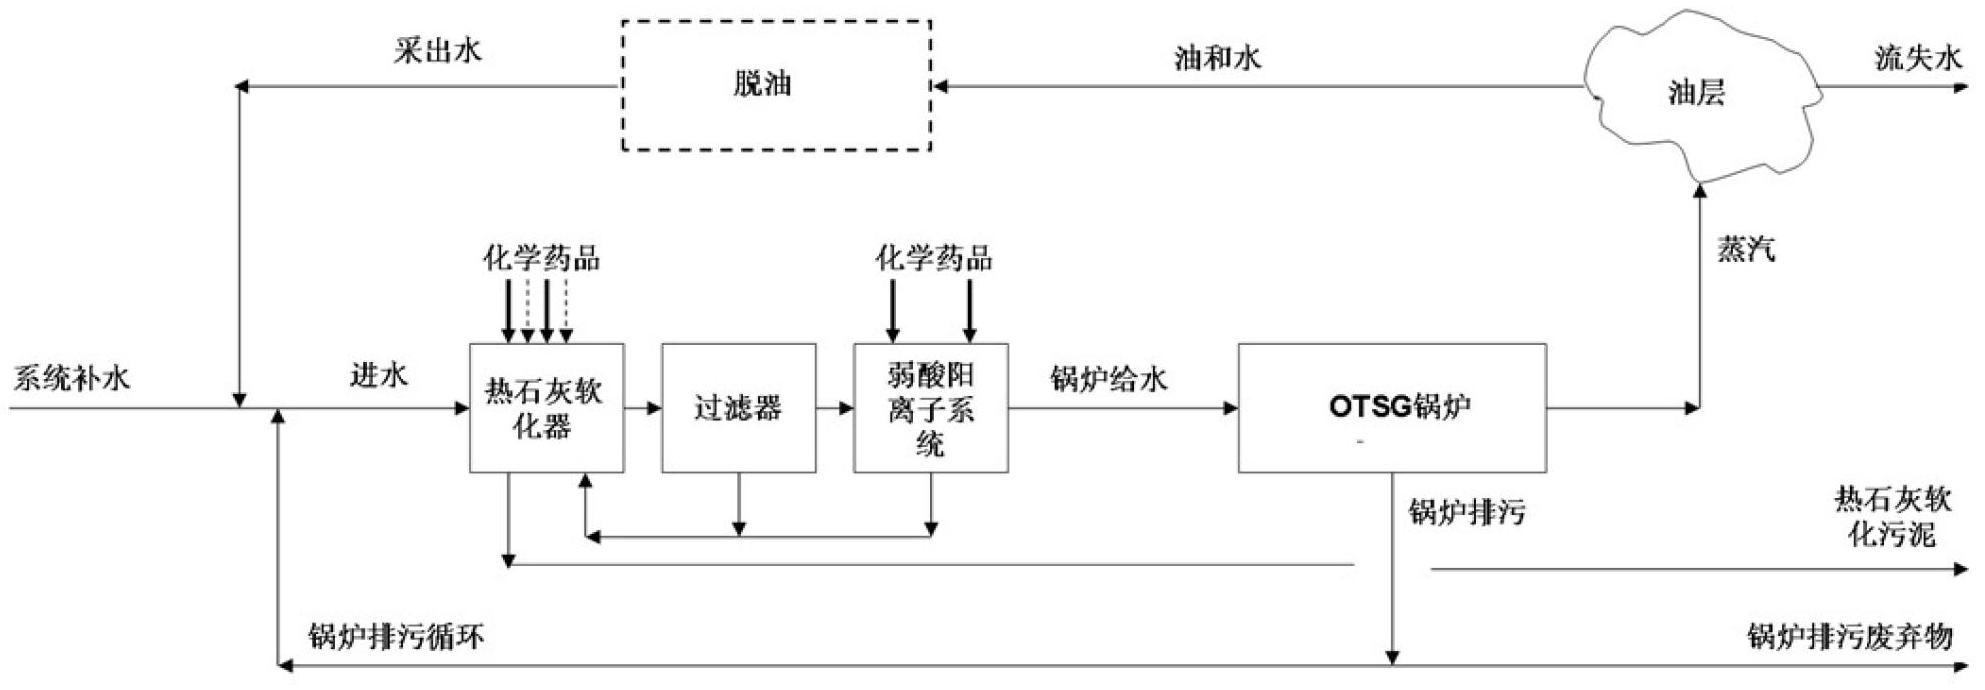 Water treatment process for recovering heavy oil recovery produced water to serve as boiler feed water